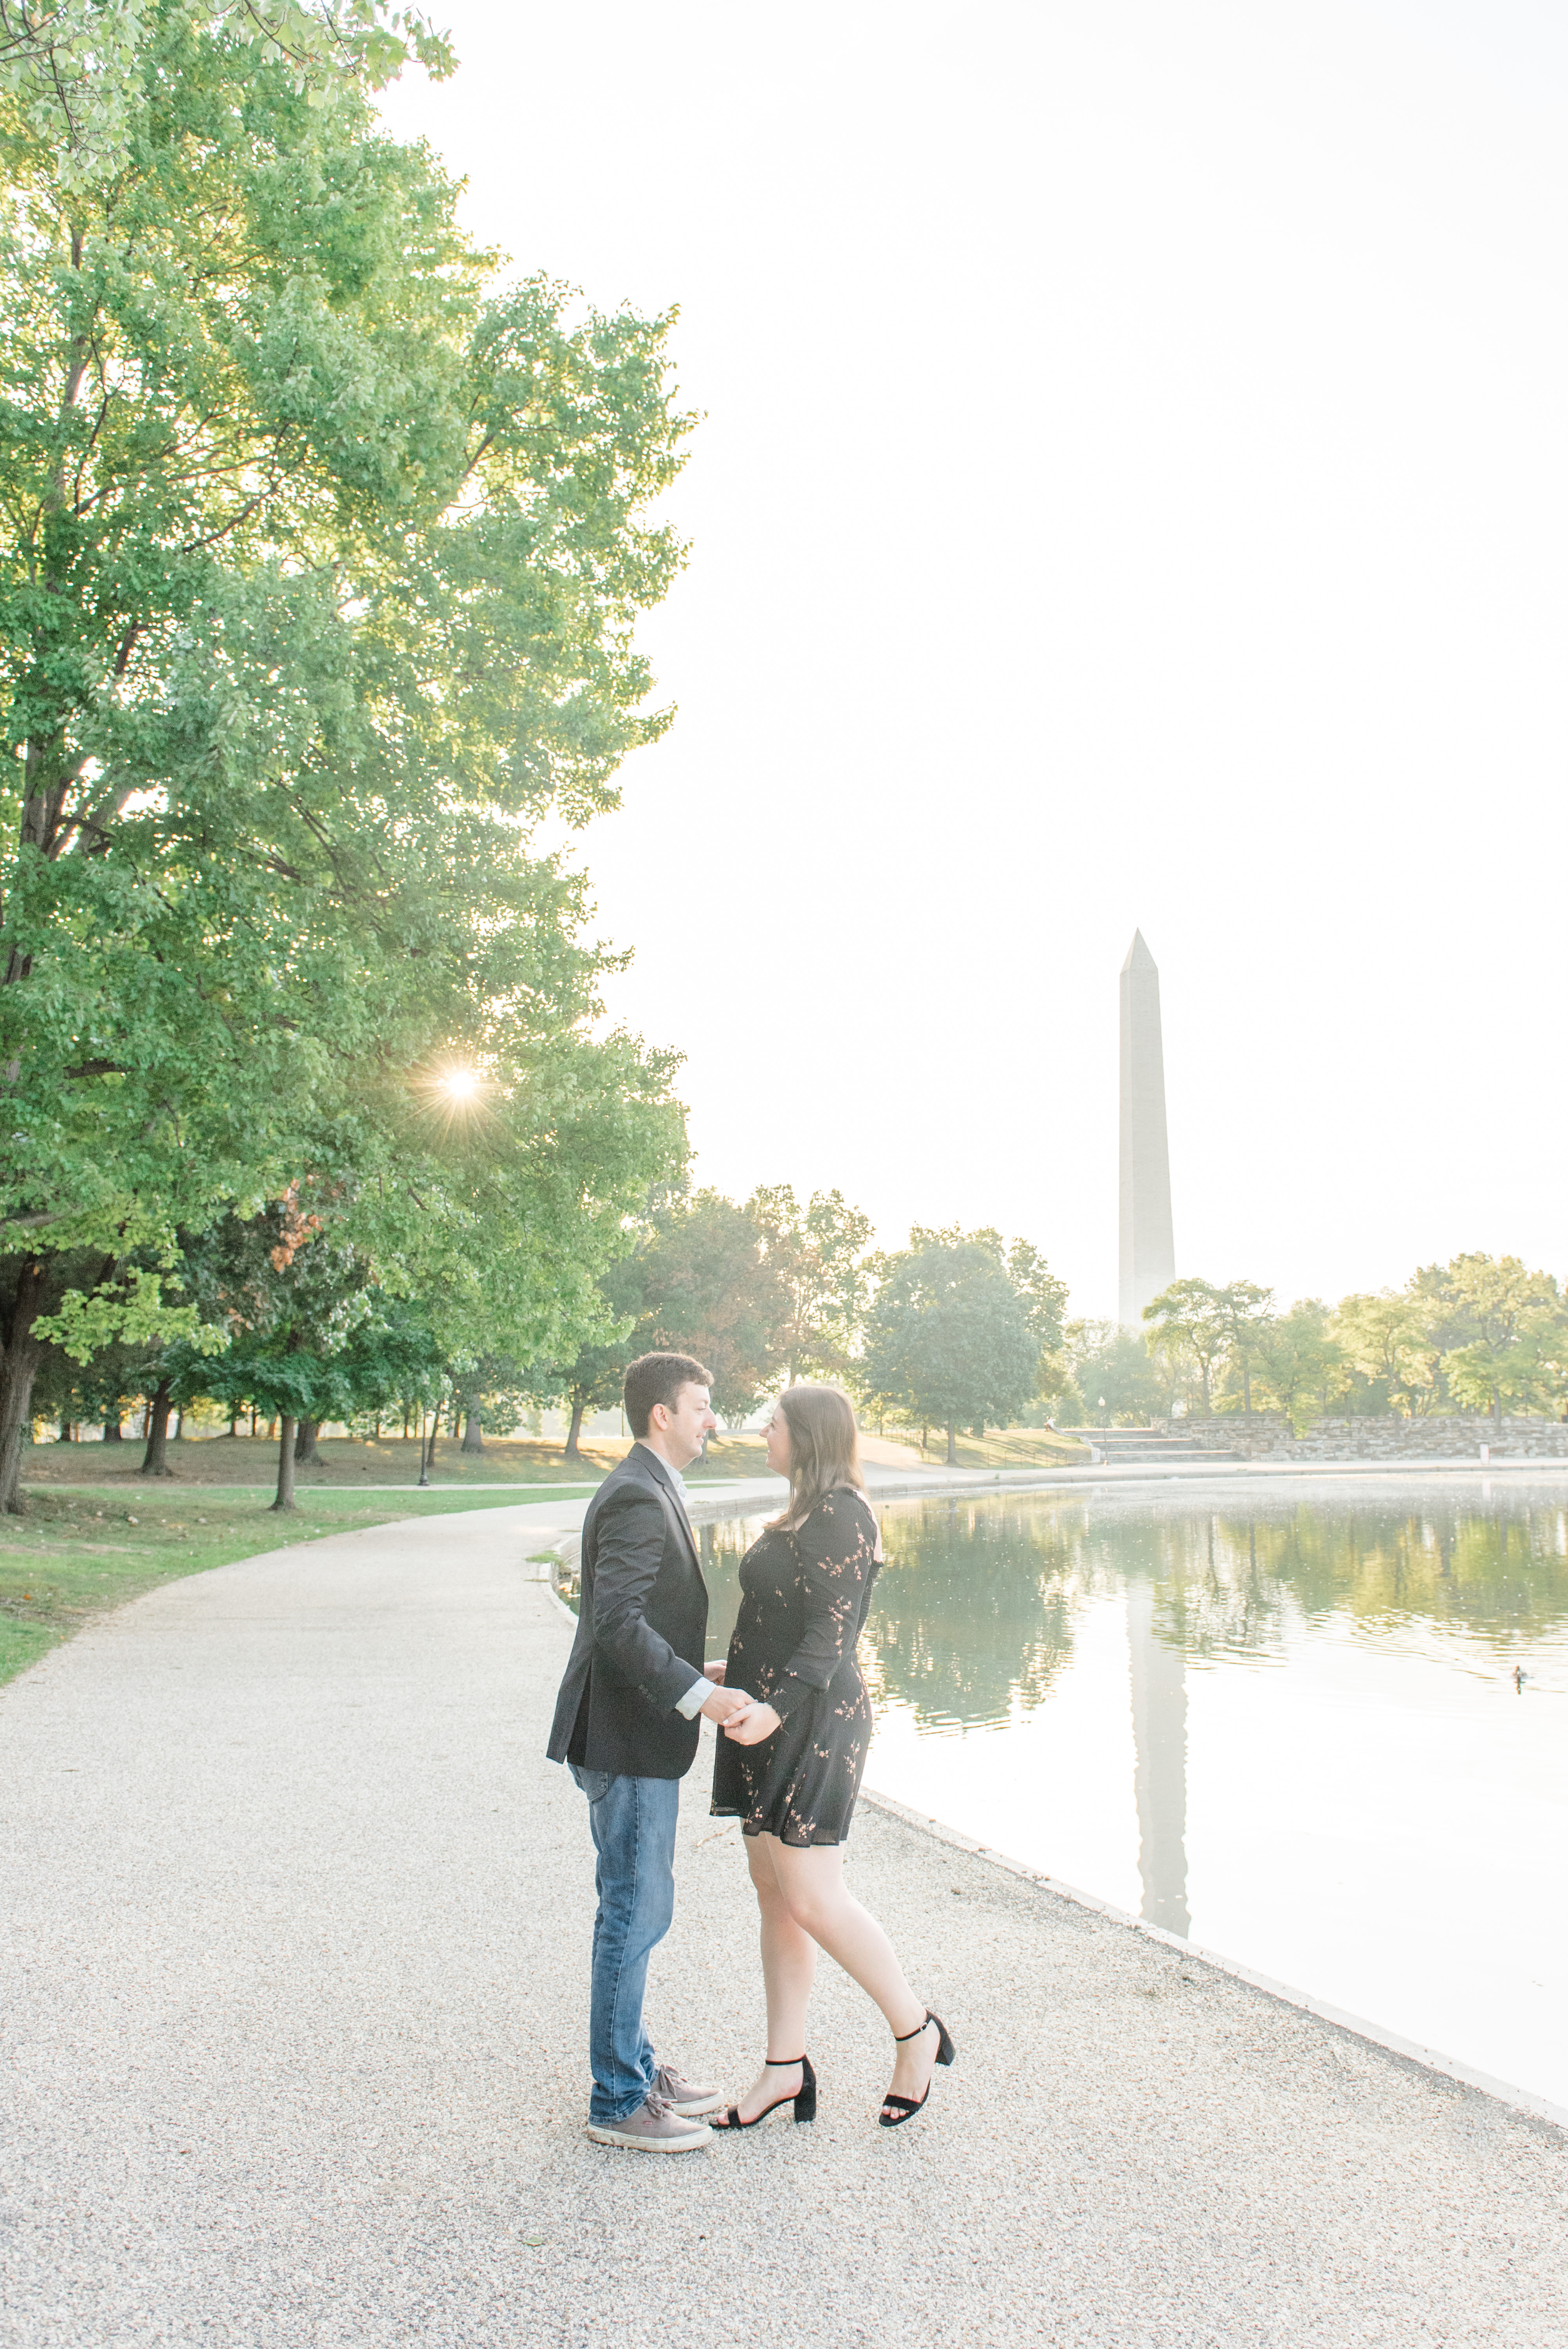 Taking photos near the Washington Monument in Washington DC is a perfect location for an engagement photographer.